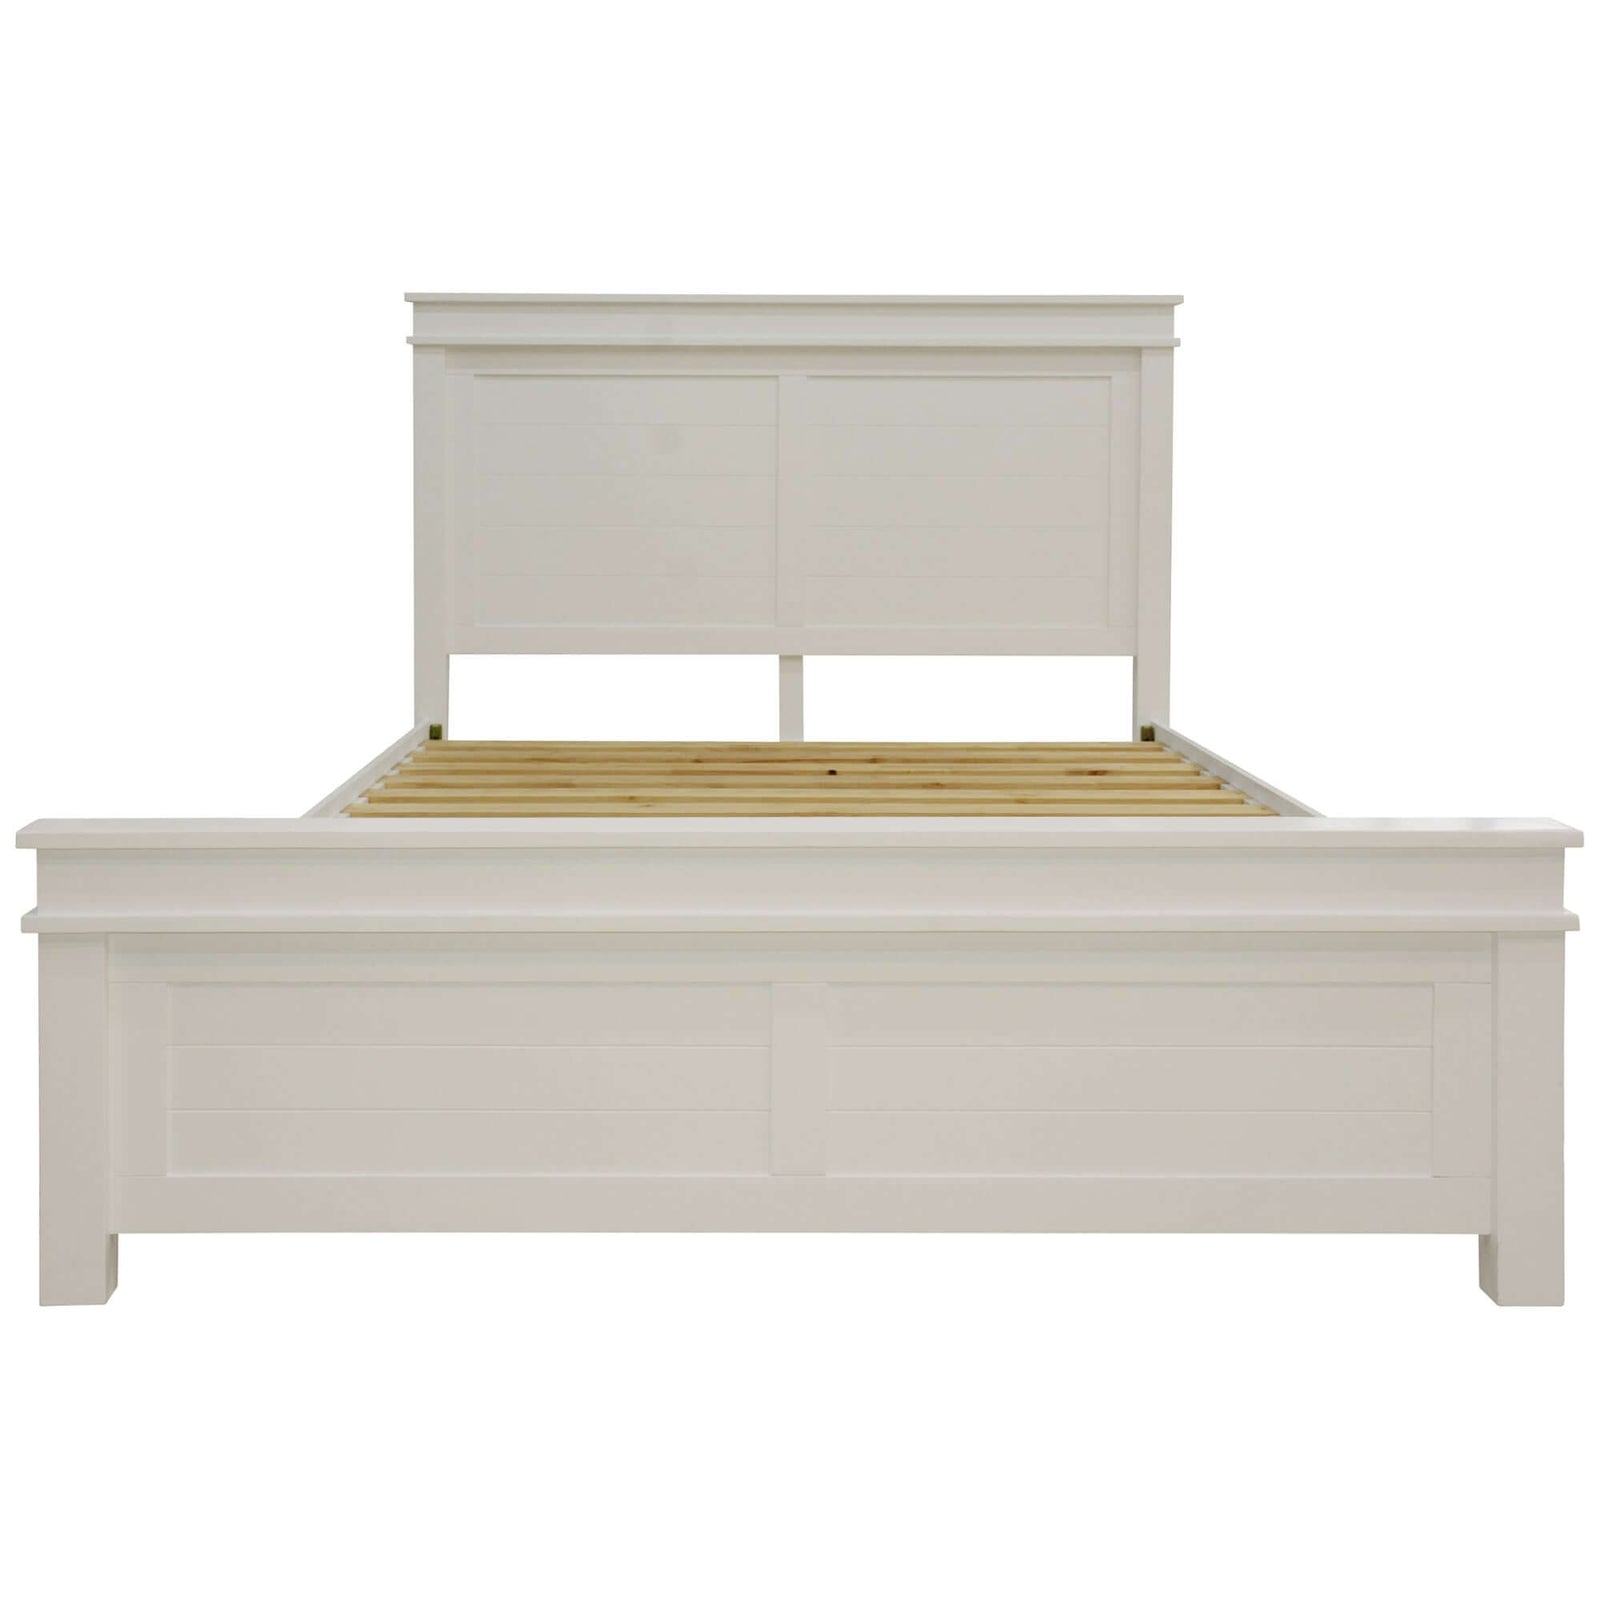 King Size Lily Bed Frame with Storage - White-Upinteriors